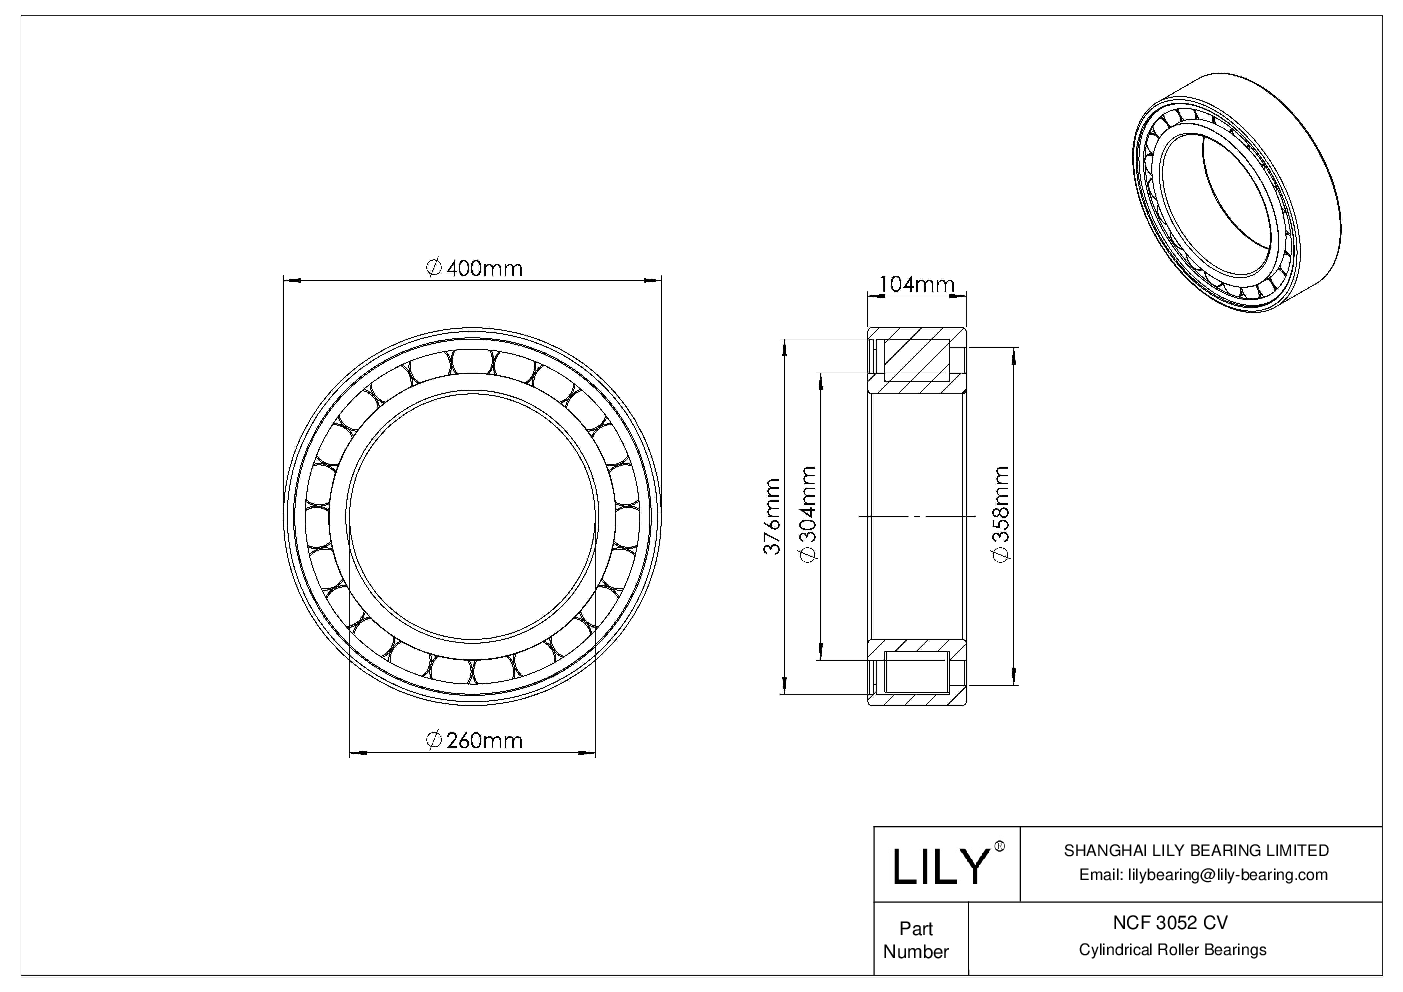 NCF 3052 CV Single Row Full Complement Cylindrical Roller Bearings cad drawing